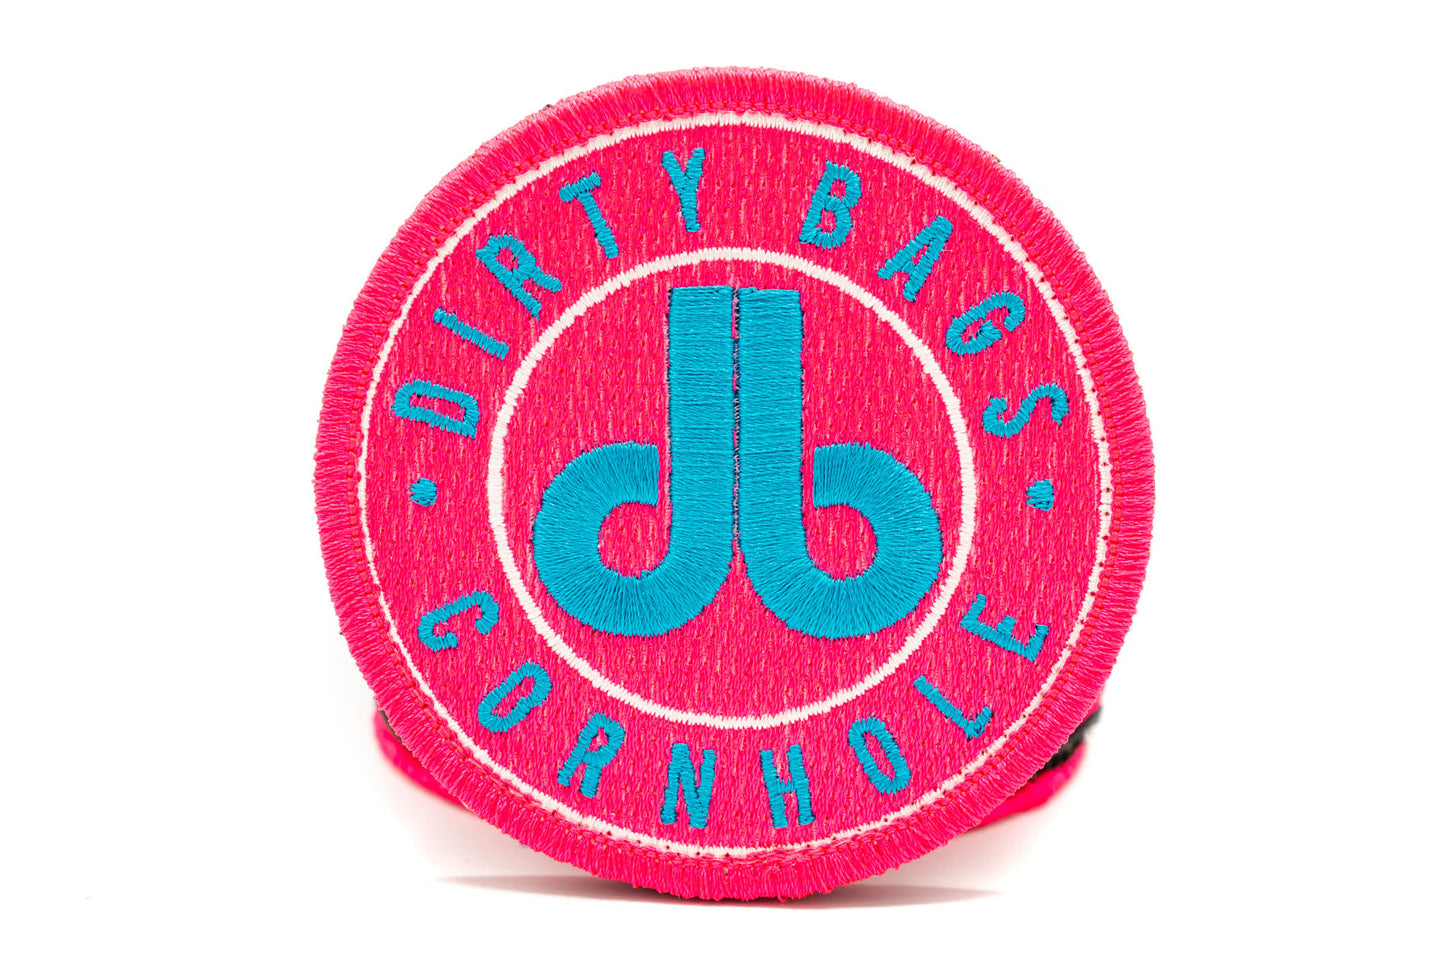 db Velcro Patch - Neon Pink and Turquoise